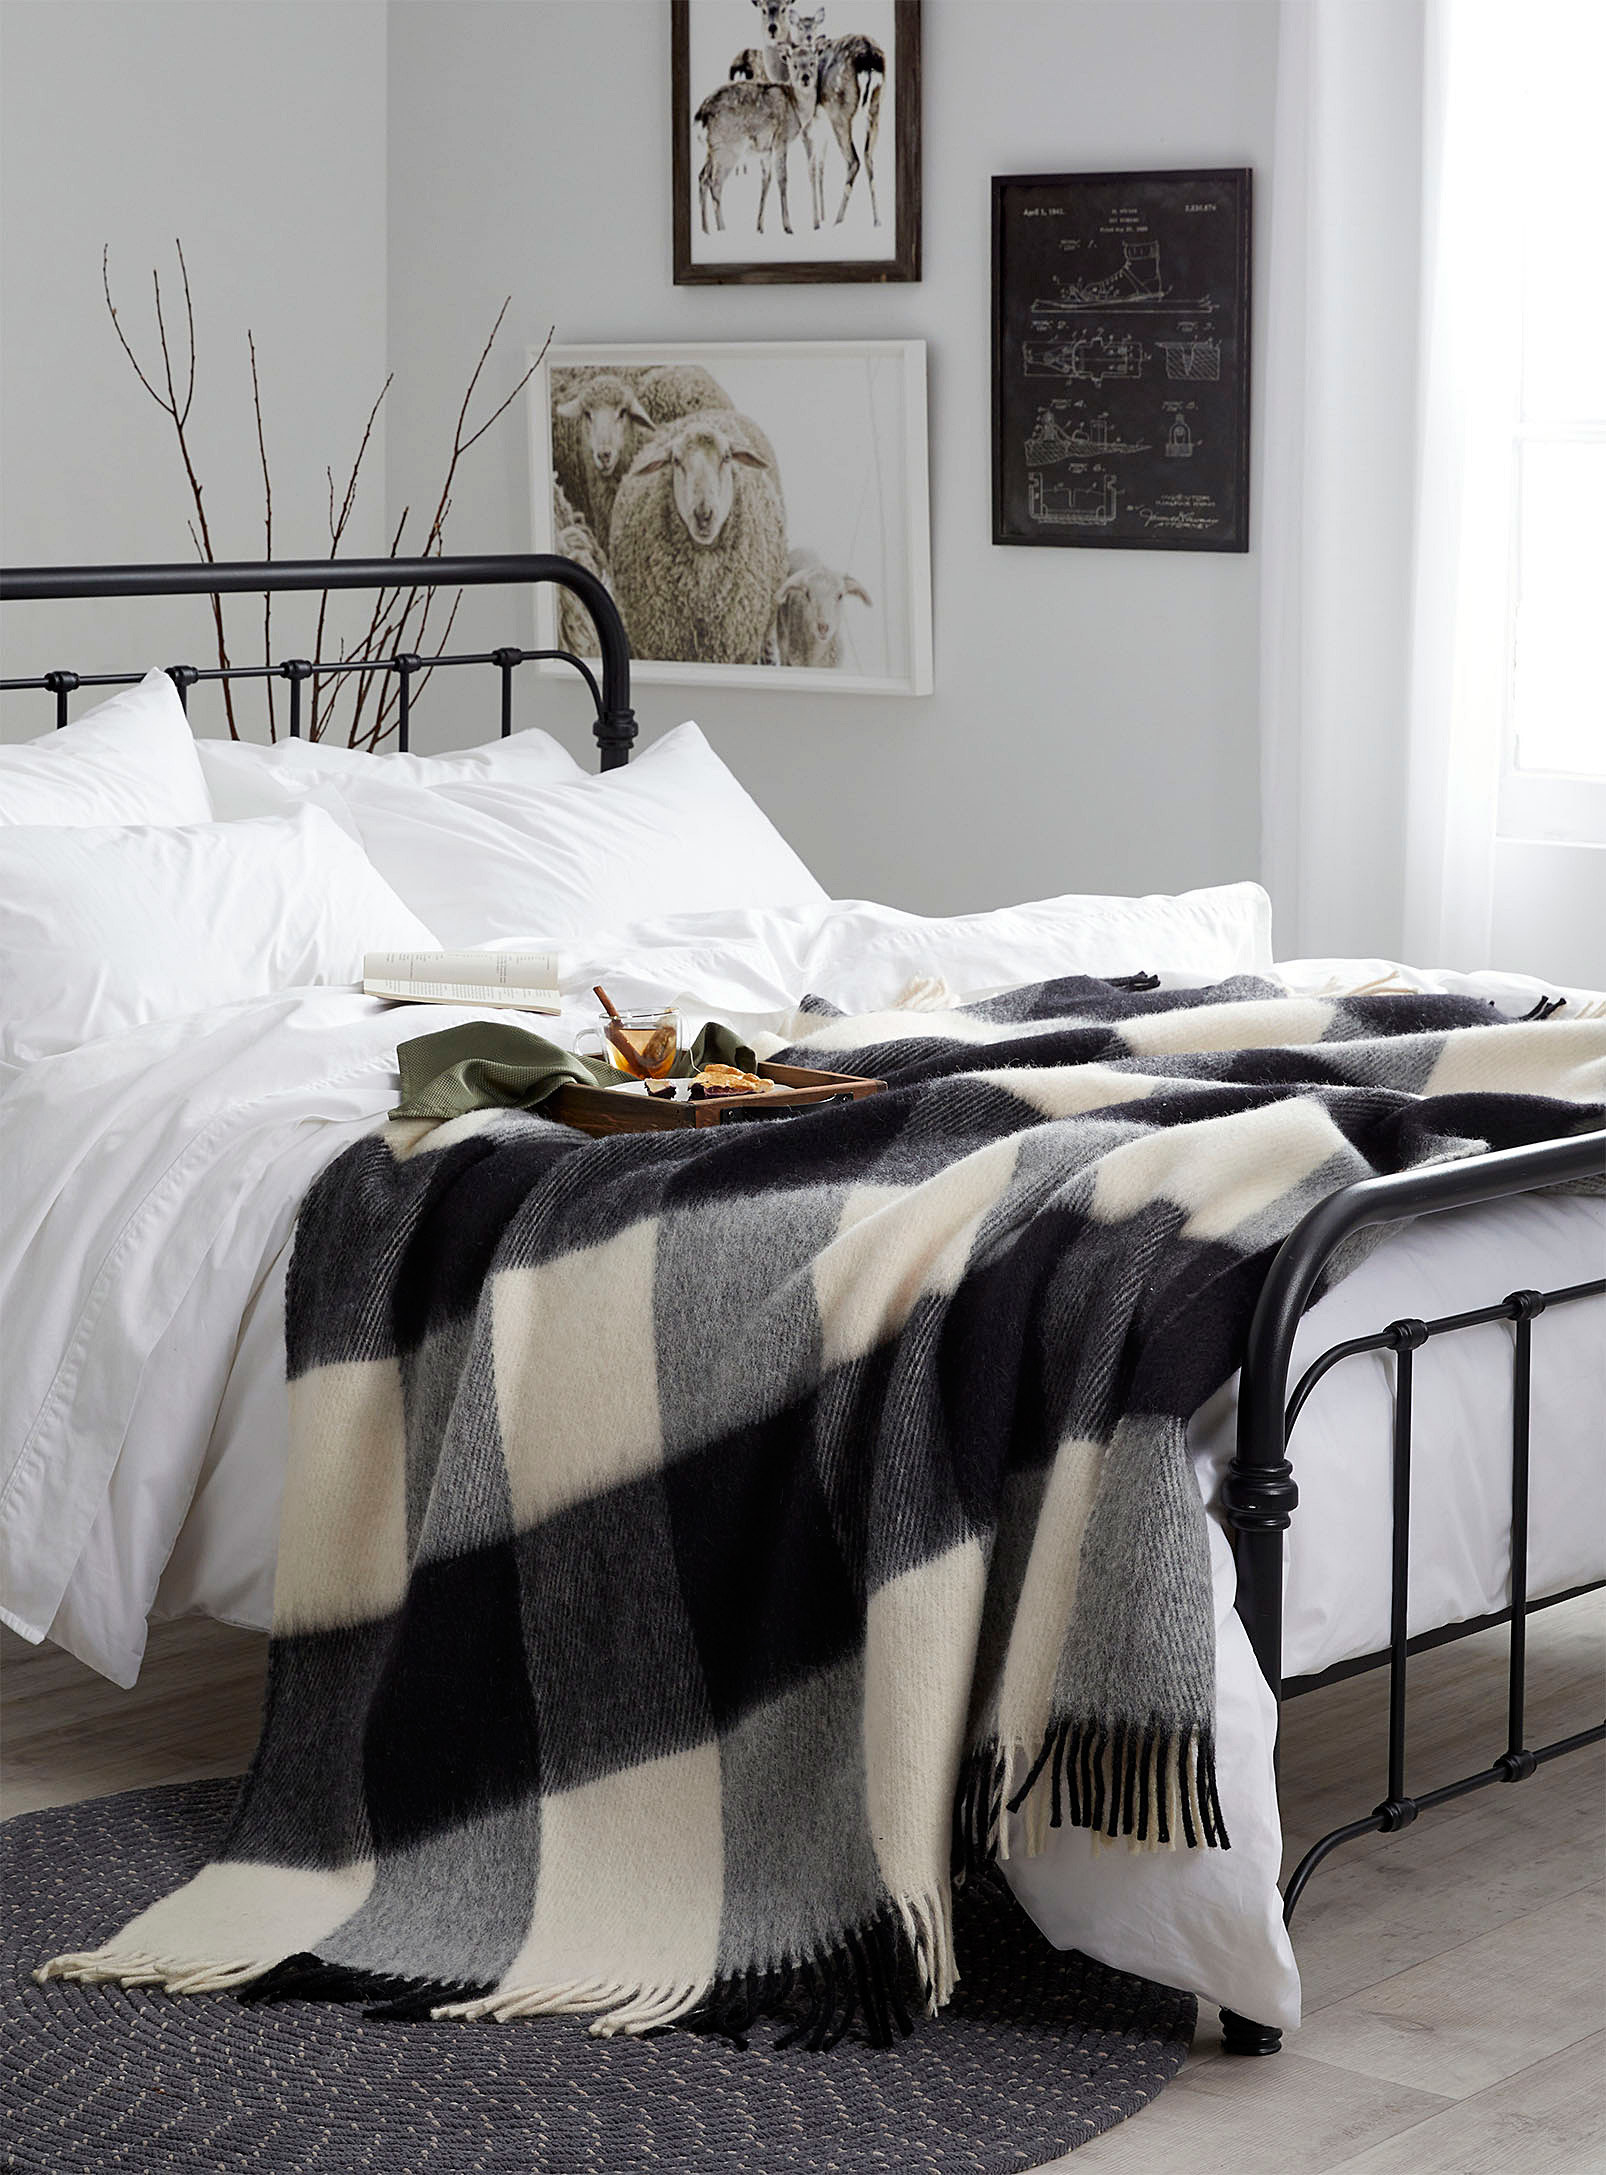 A throw blanket draped across a bed